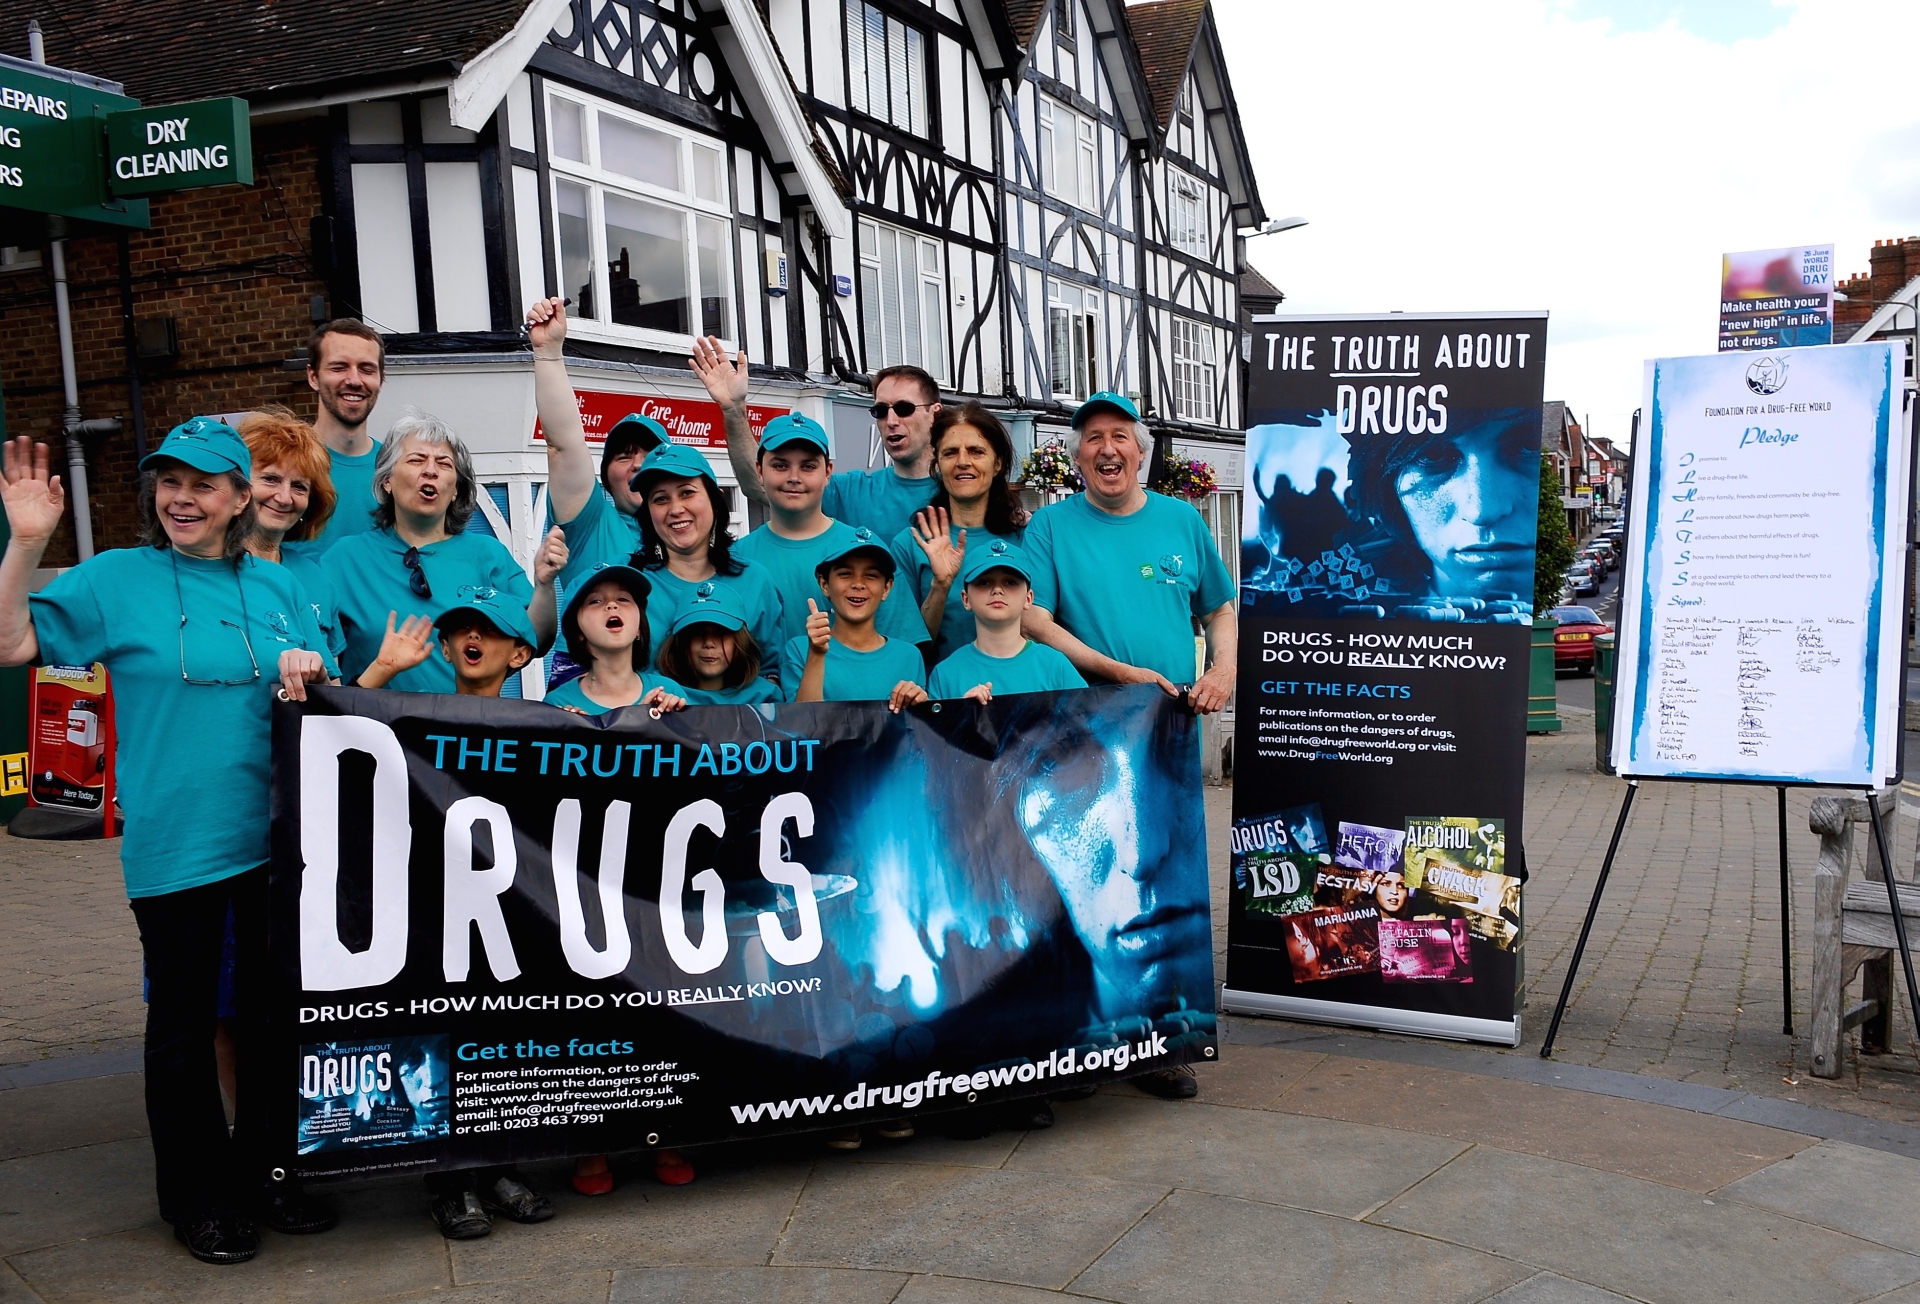 Crowborough Scientologists promote drug awareness in honor of International Day Against Drug Abuse and Illicit Trafficking.